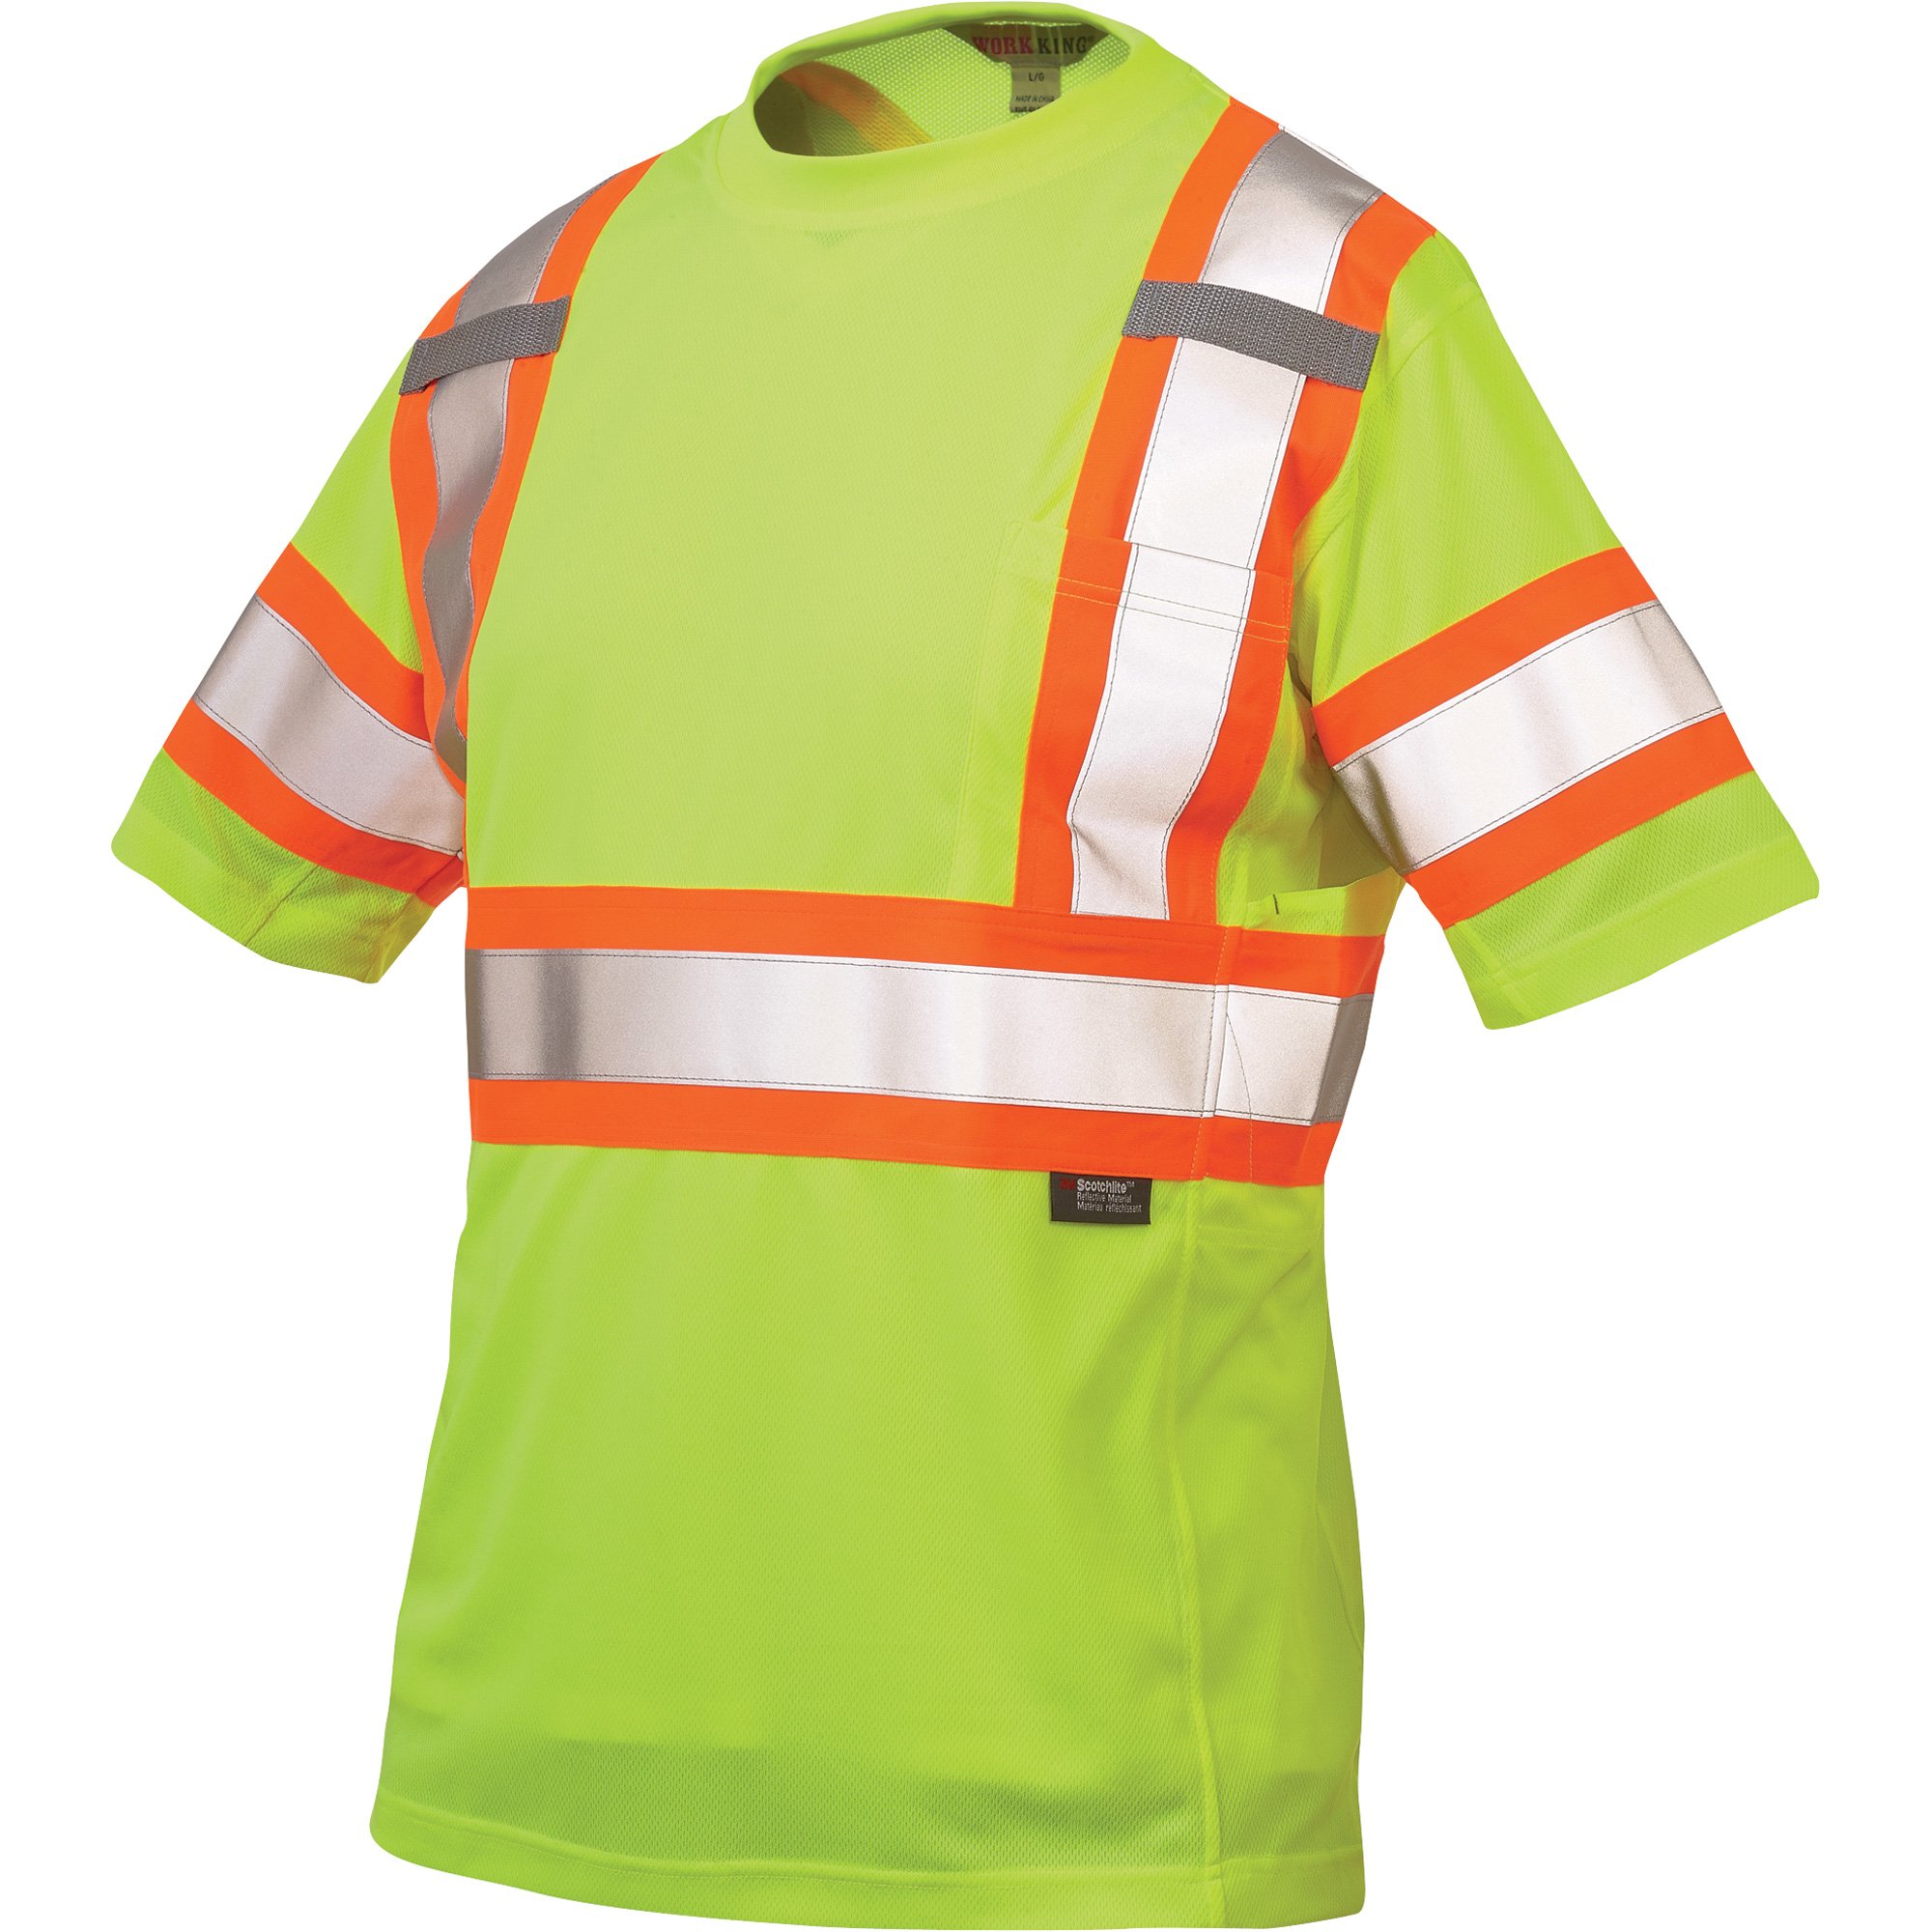 Mens High Visibility Shirts with 3M ScotchliteTM Reflective Tape 100%  Cotton Long Sleeve 2 Tone Block Color - Buy Online - 166219382